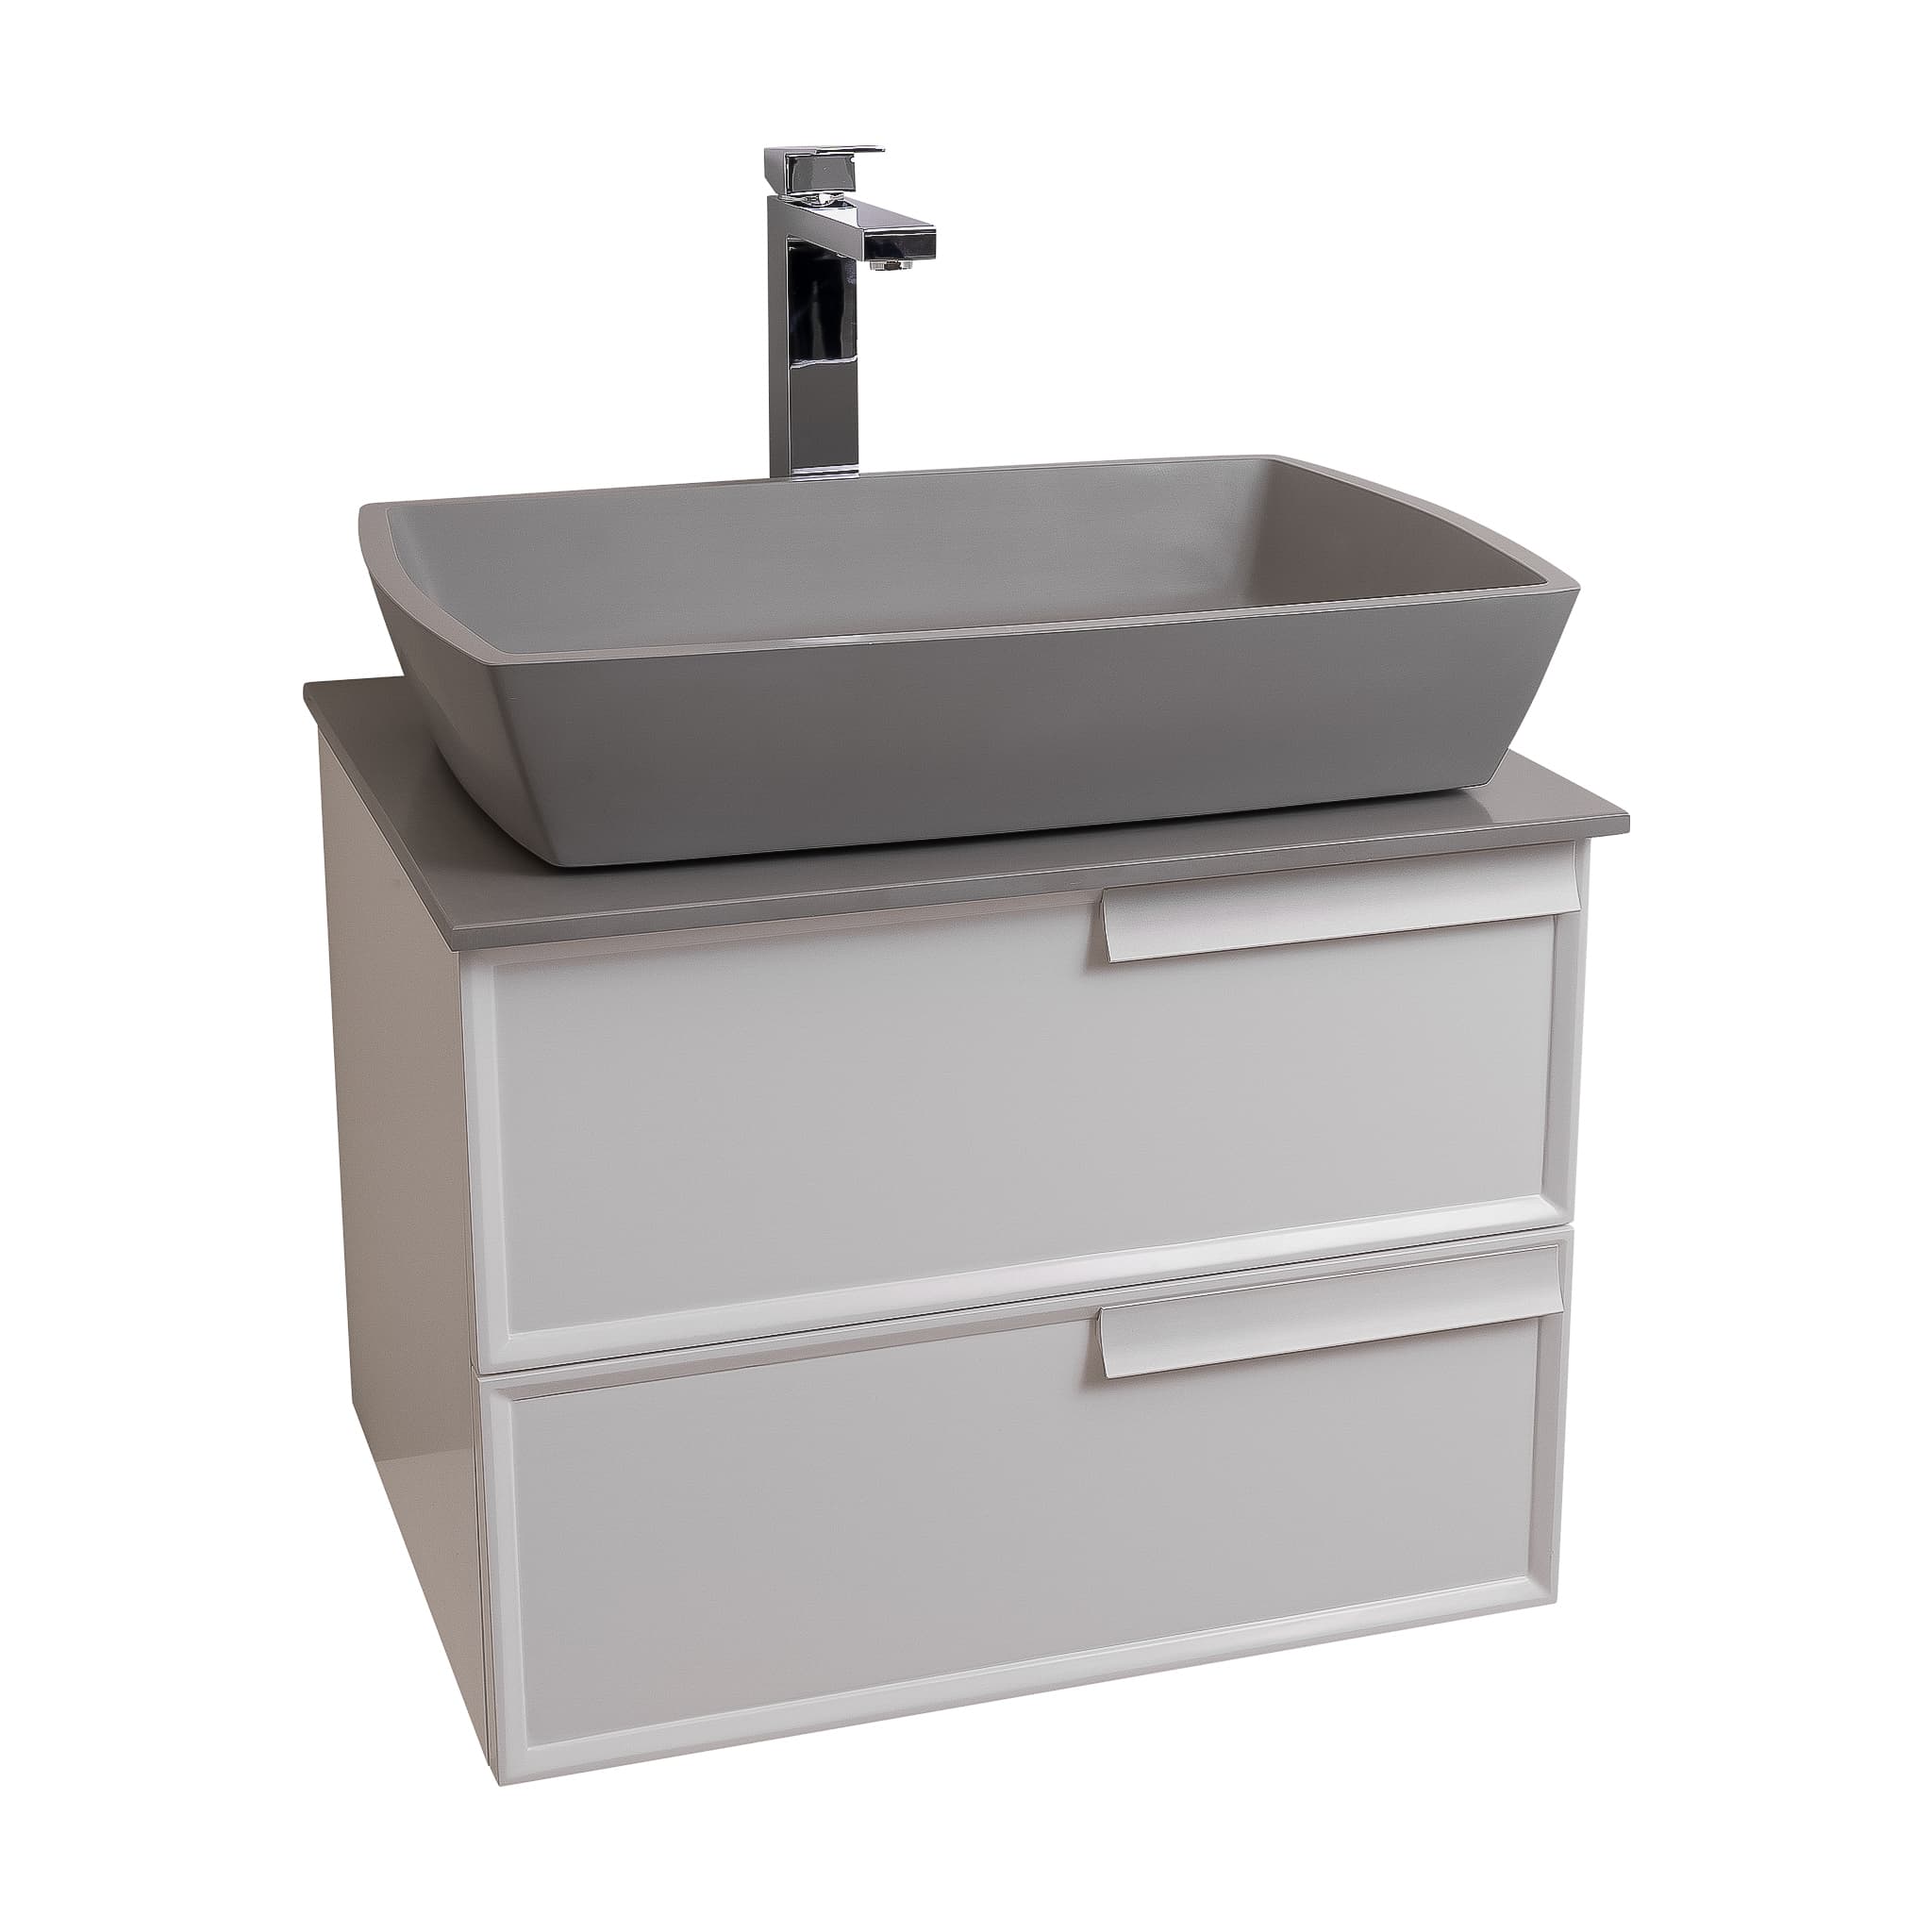 Garda 23.5 Matte White Cabinet, Solid Surface Flat Grey Counter and Square Solid Surface Grey Basin 1316, Wall Mounted Modern Vanity Set